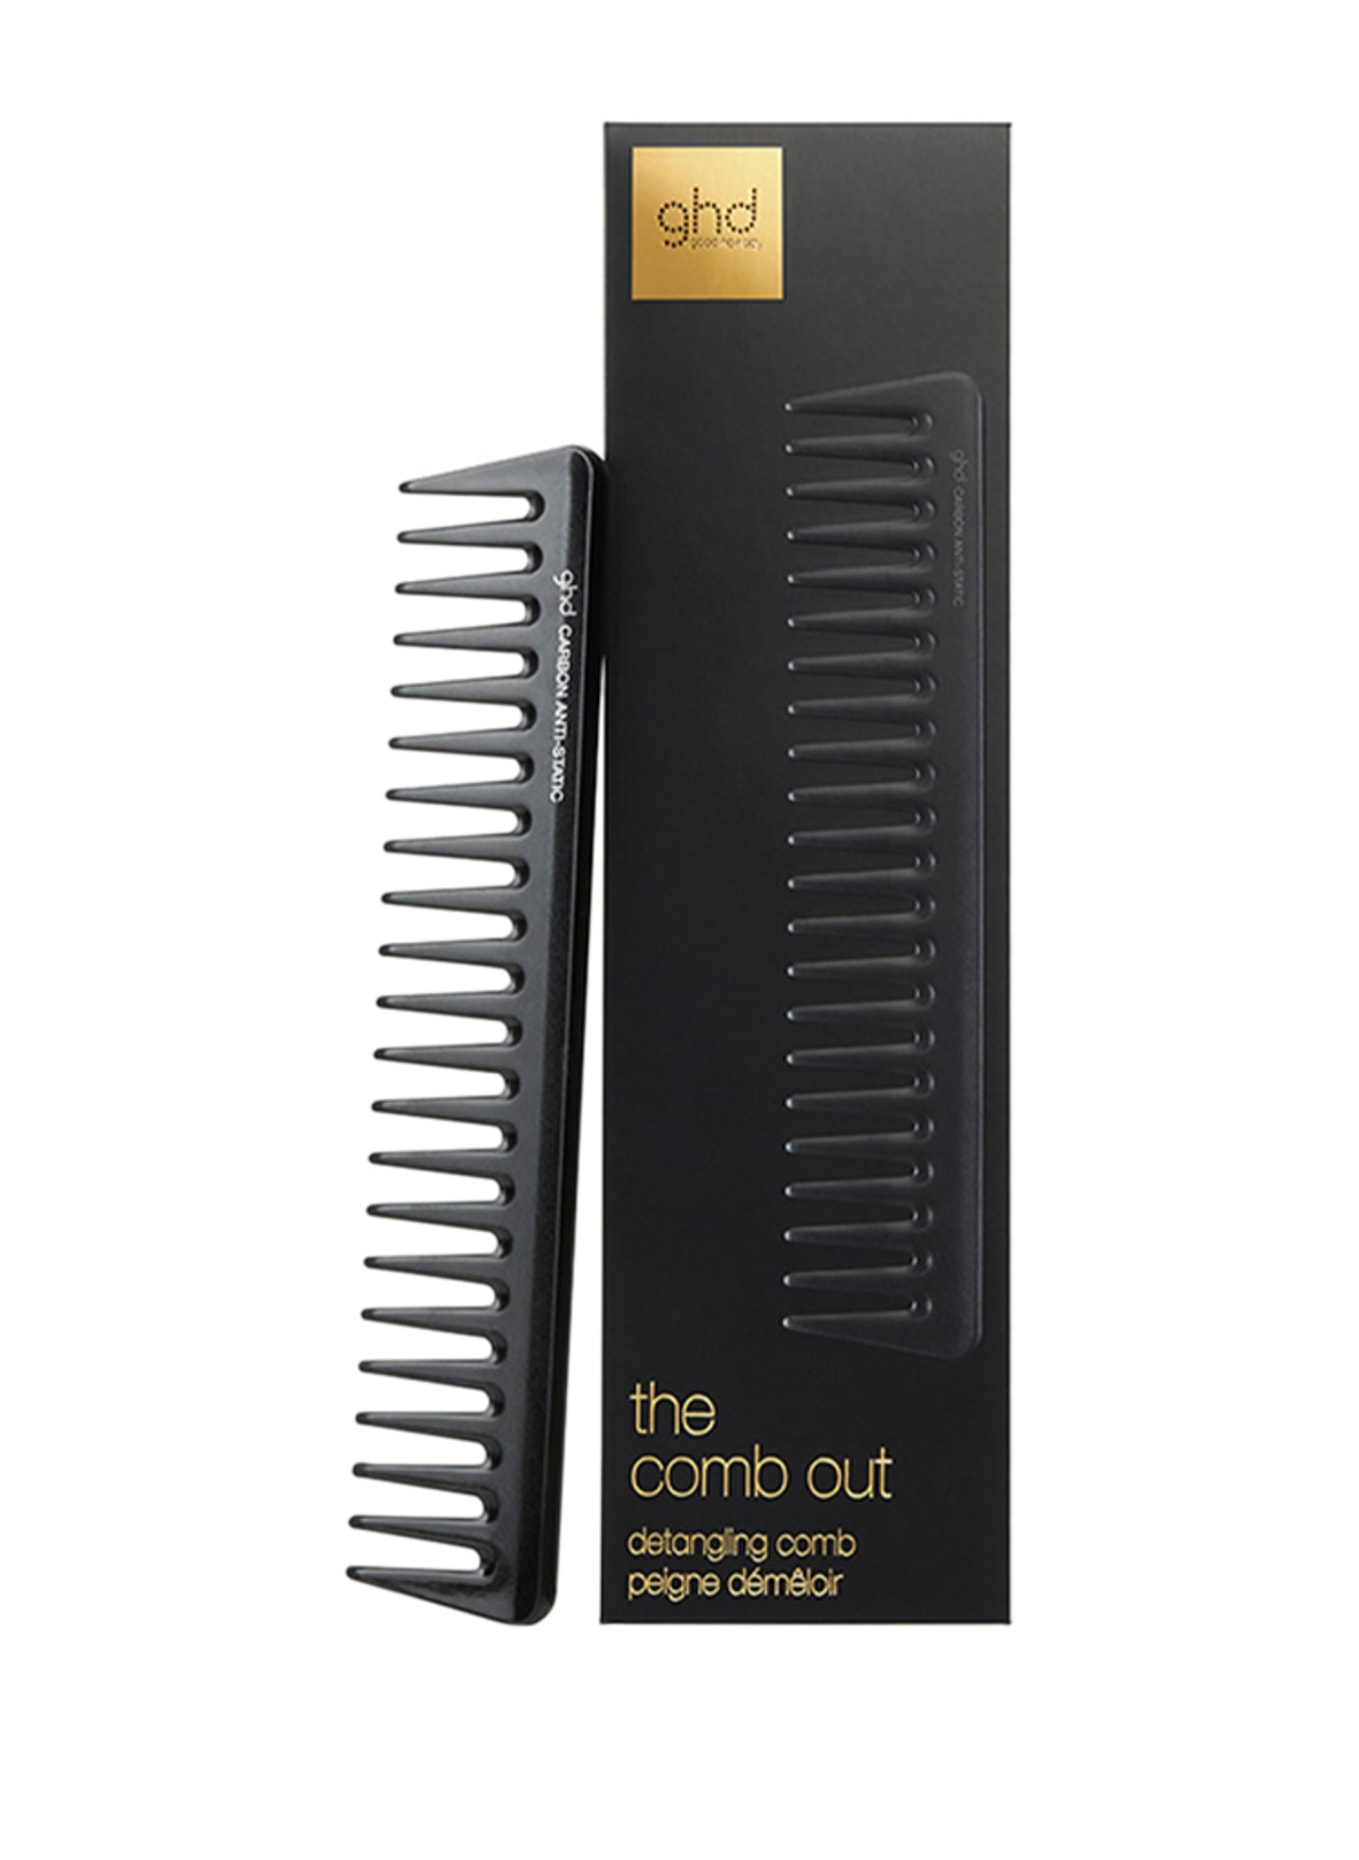 ghd THE COMB OUT (Obrazek 2)